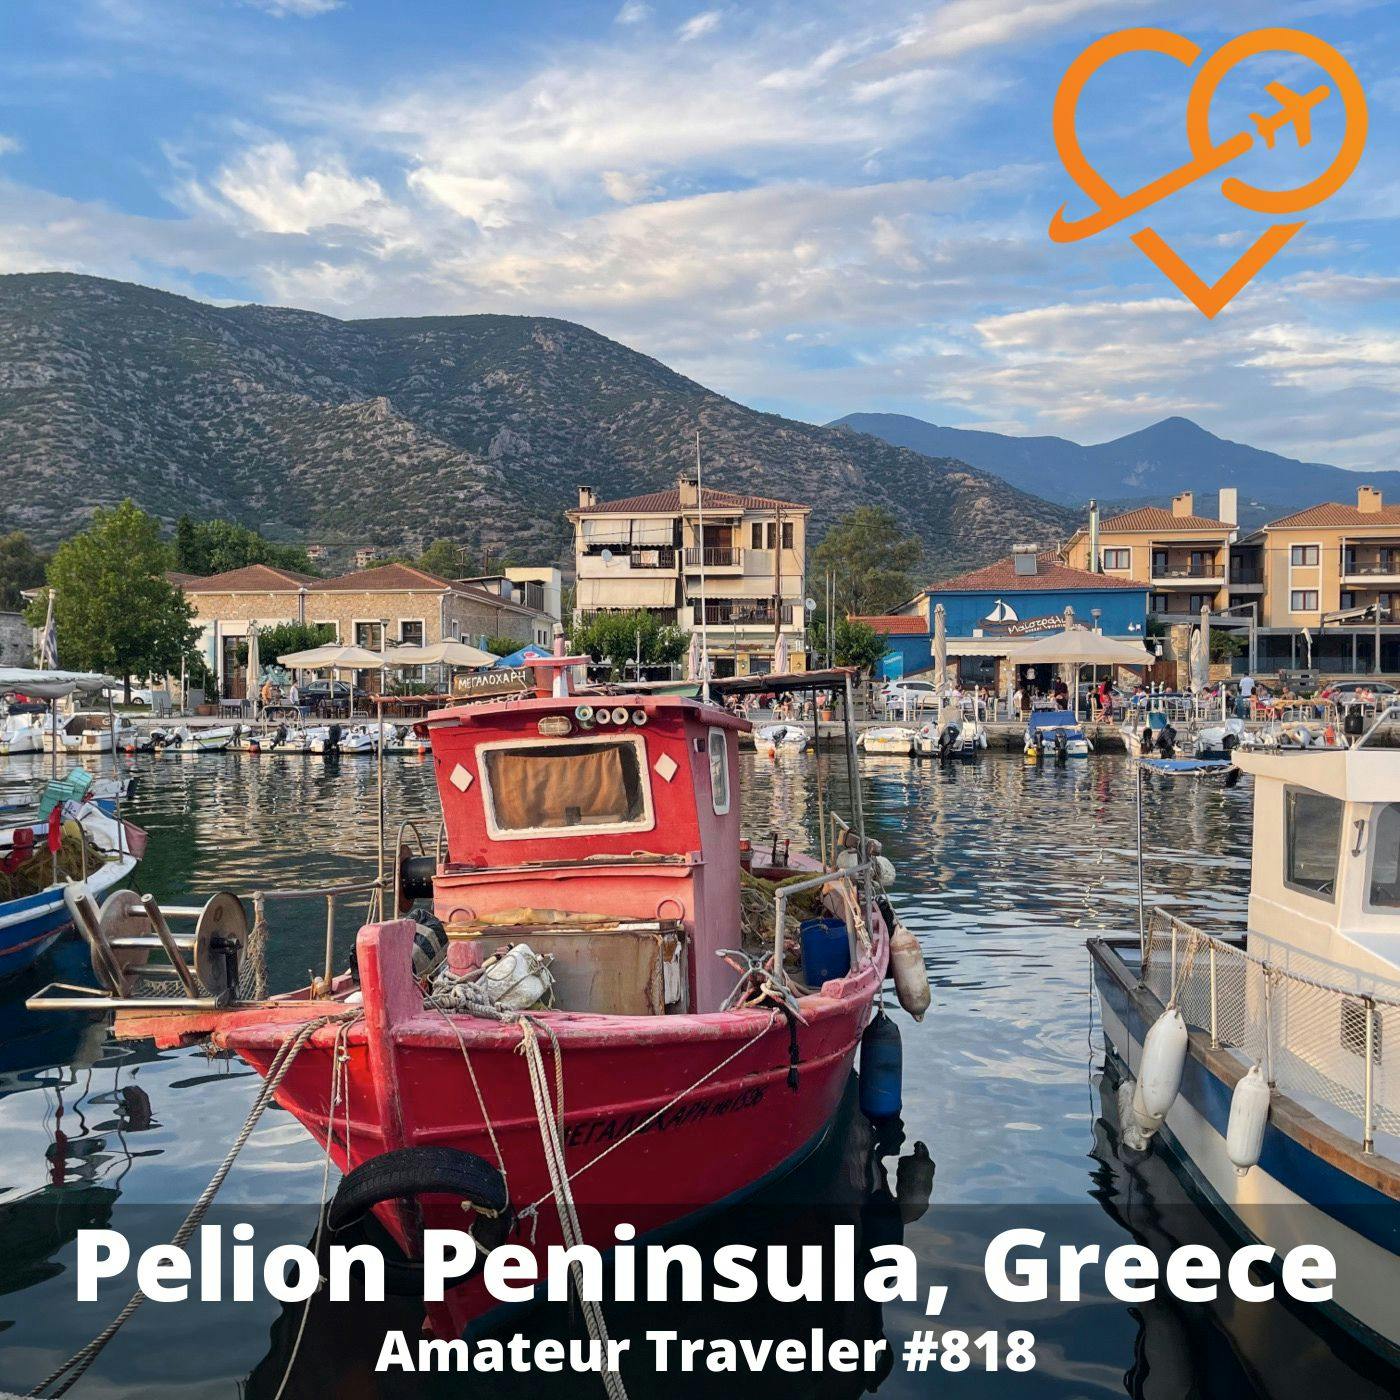 AT#818 - Travel to Volos, Greece and the Pelion Peninsula